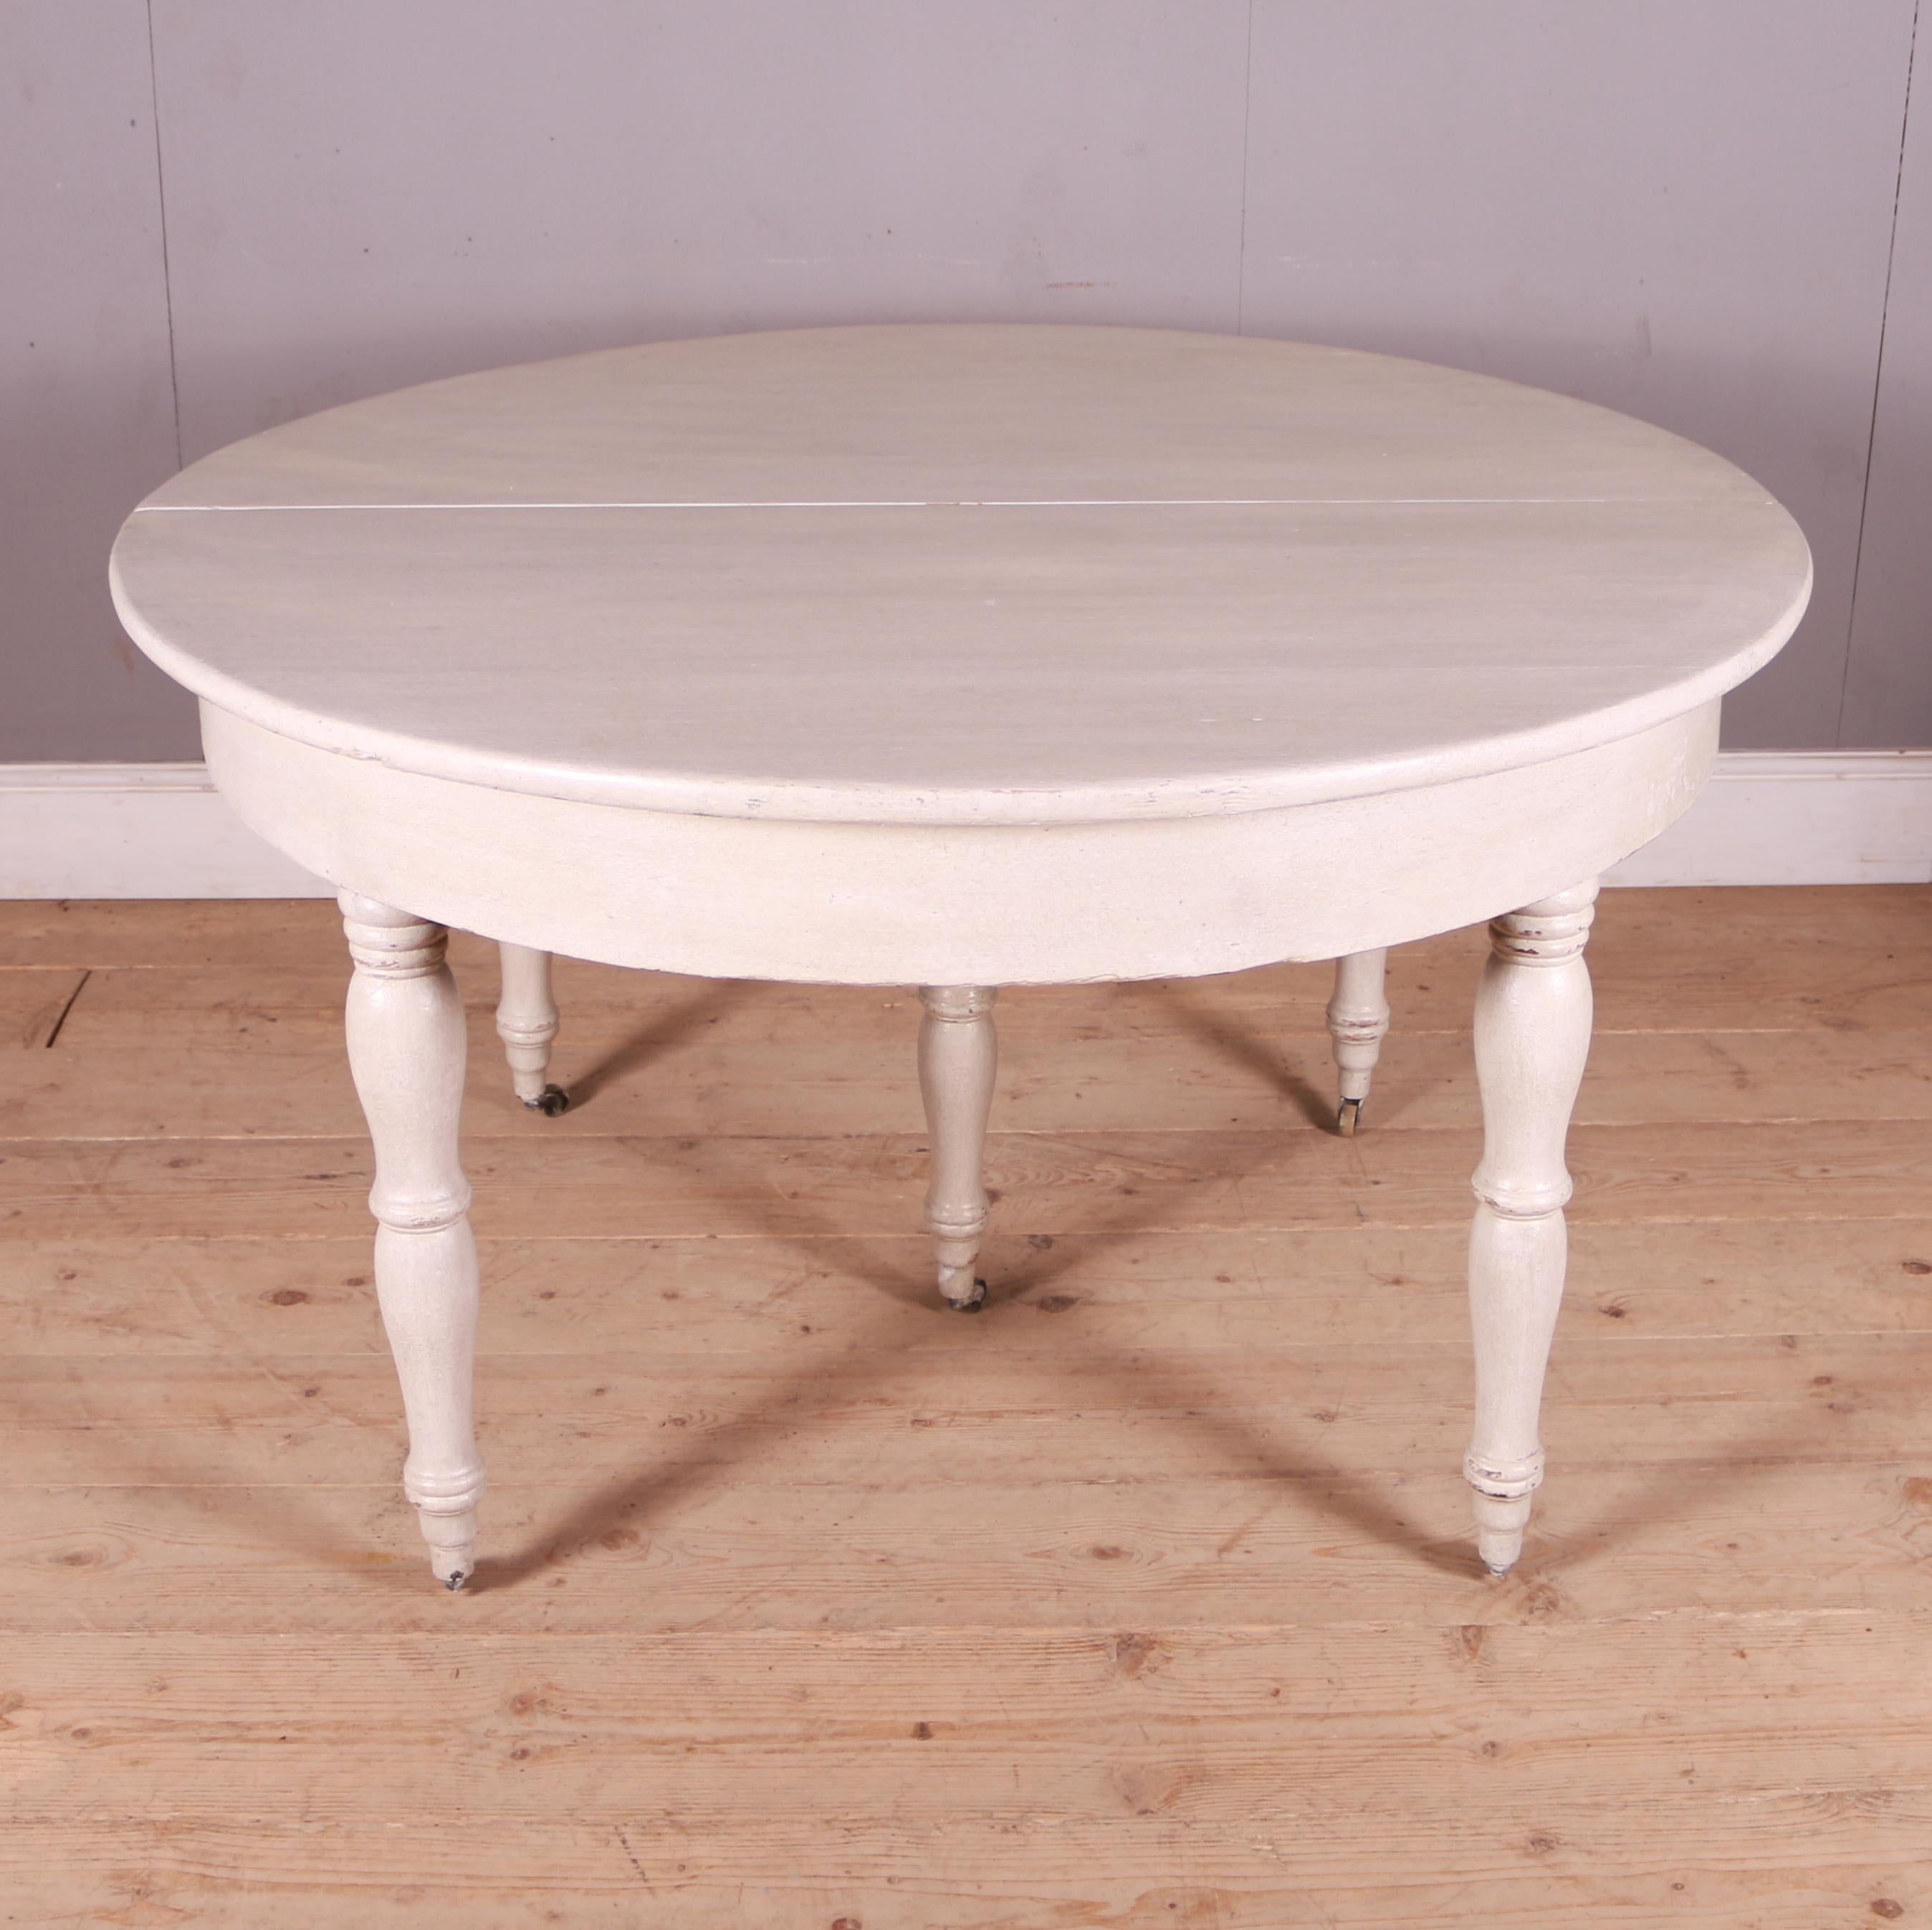 Large 19th C Austrian painted pine extendable dining table with 6 leafs and a removable centre leg. 1840.

With current leaves this table can extend to 121